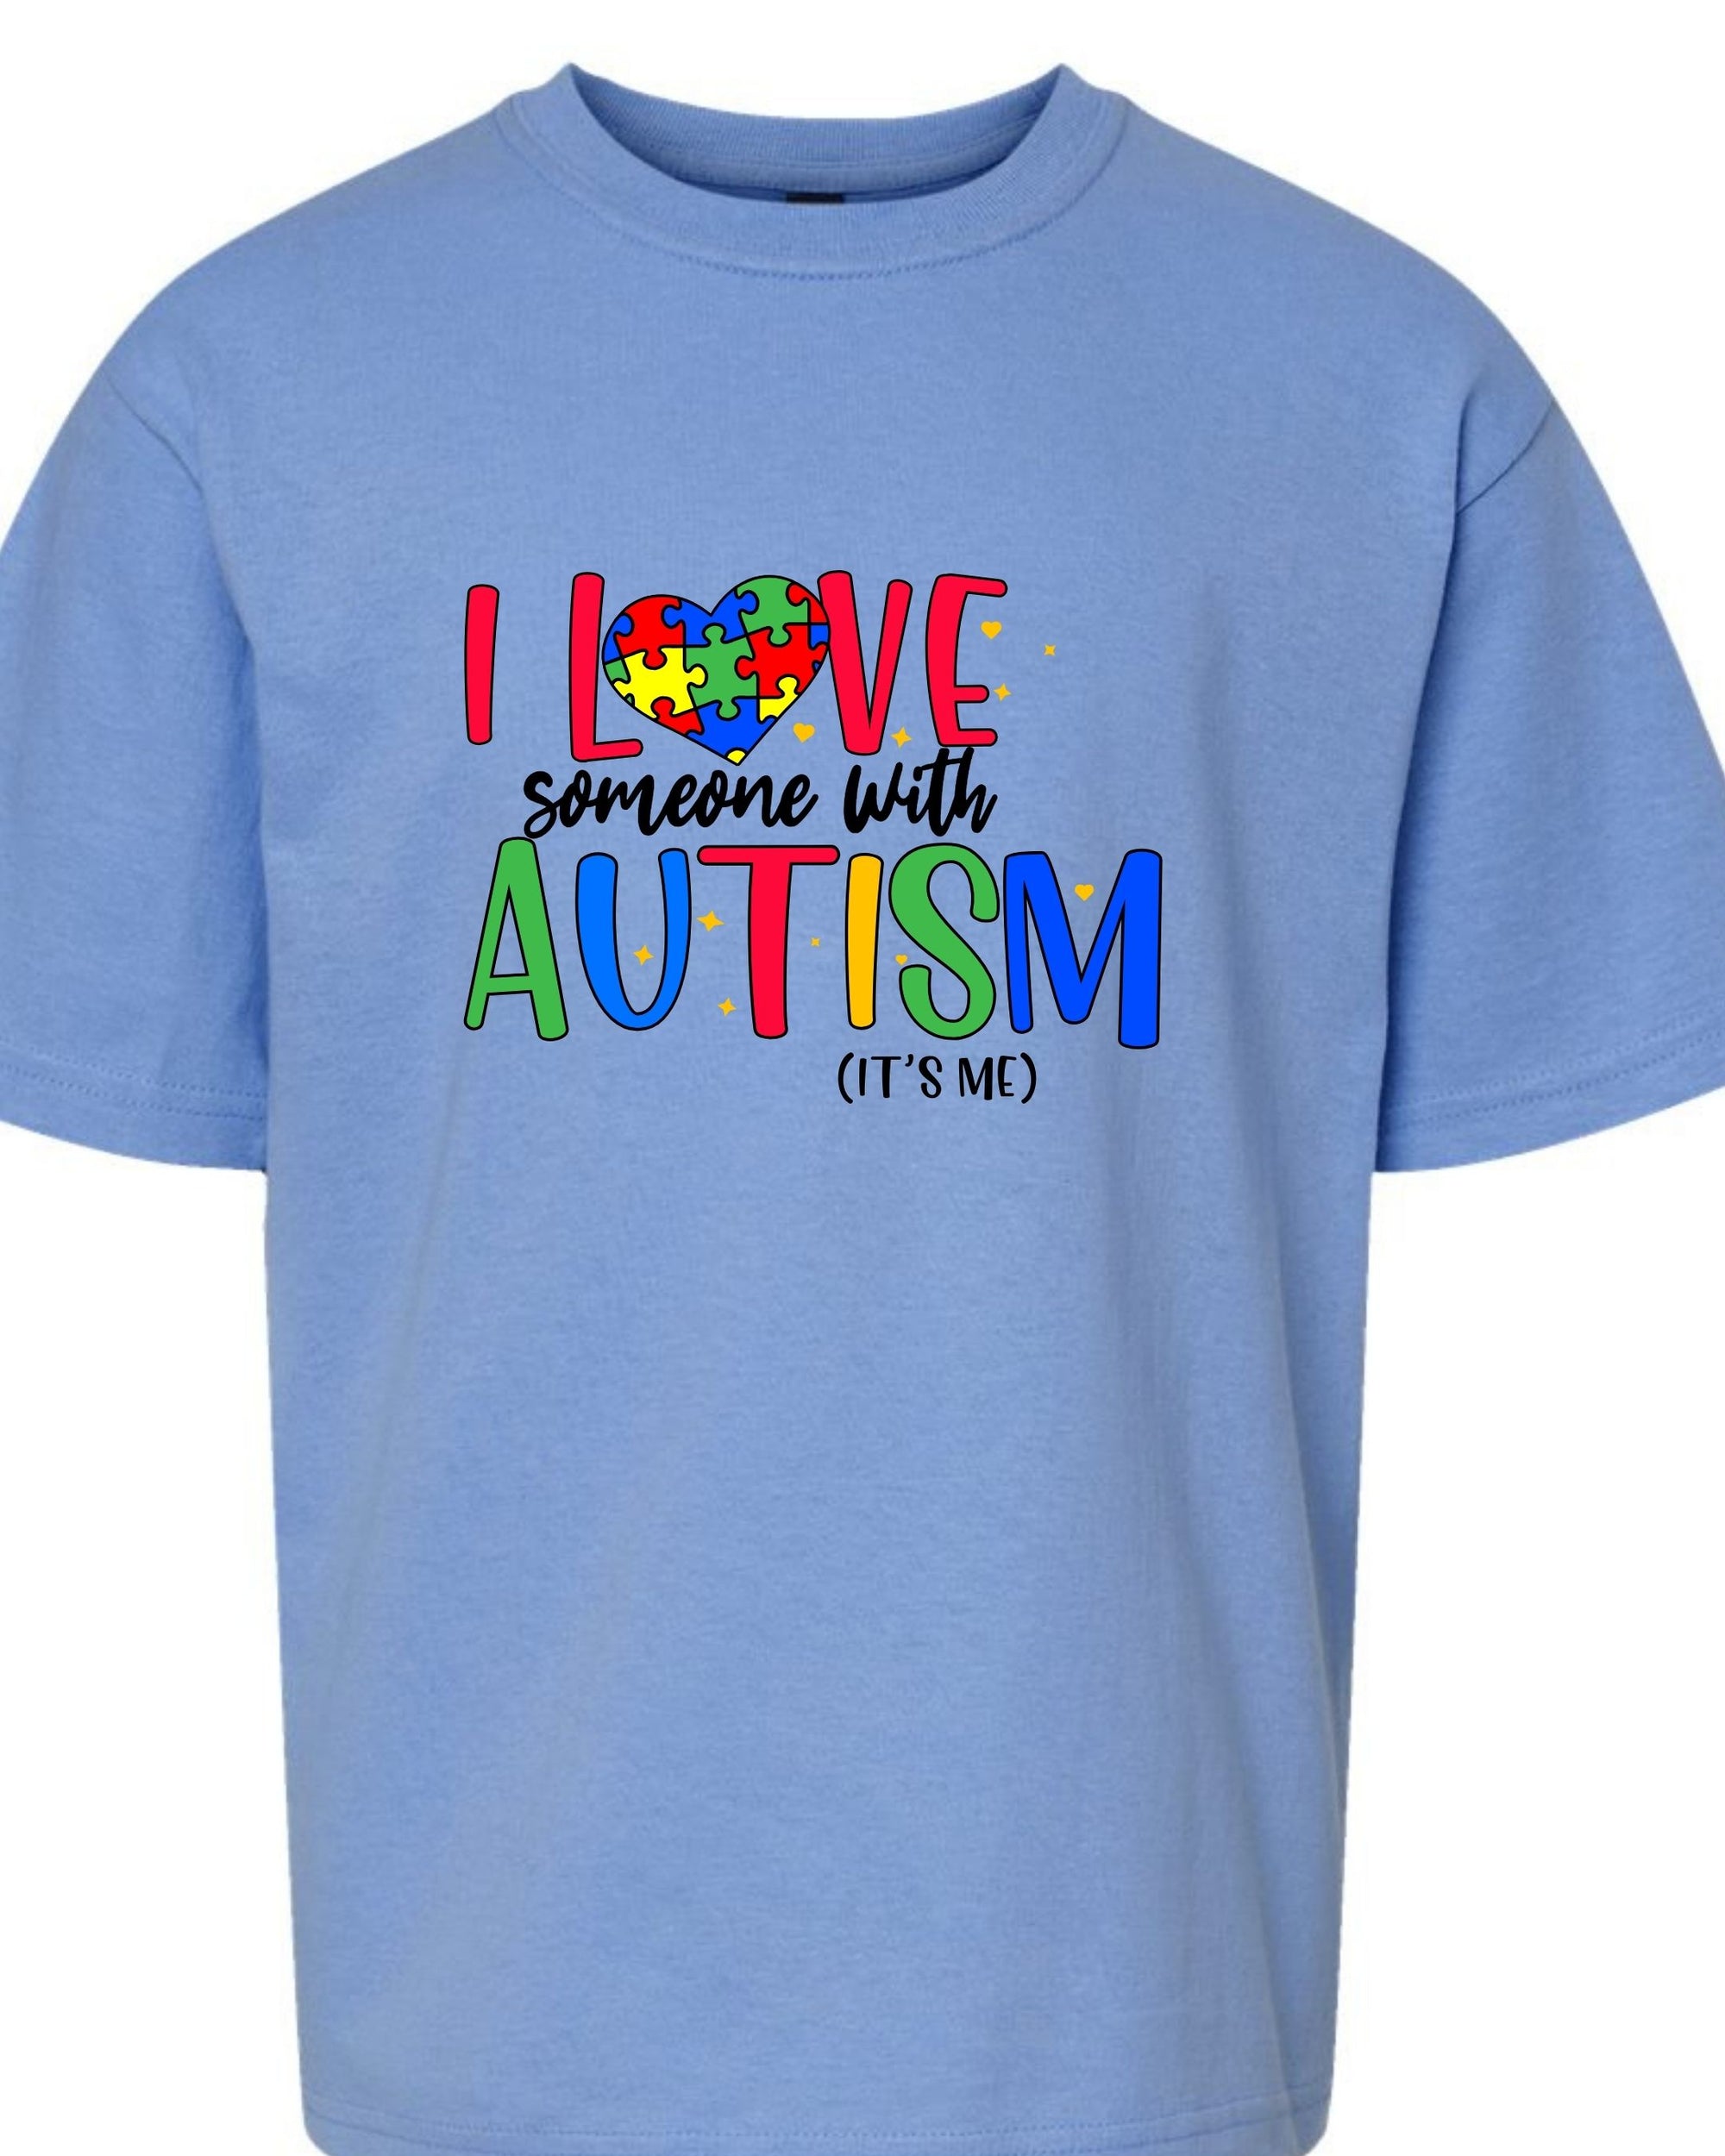 I Love Someone with Autism, It's Me - Blue, White or Black | Adult + Youth